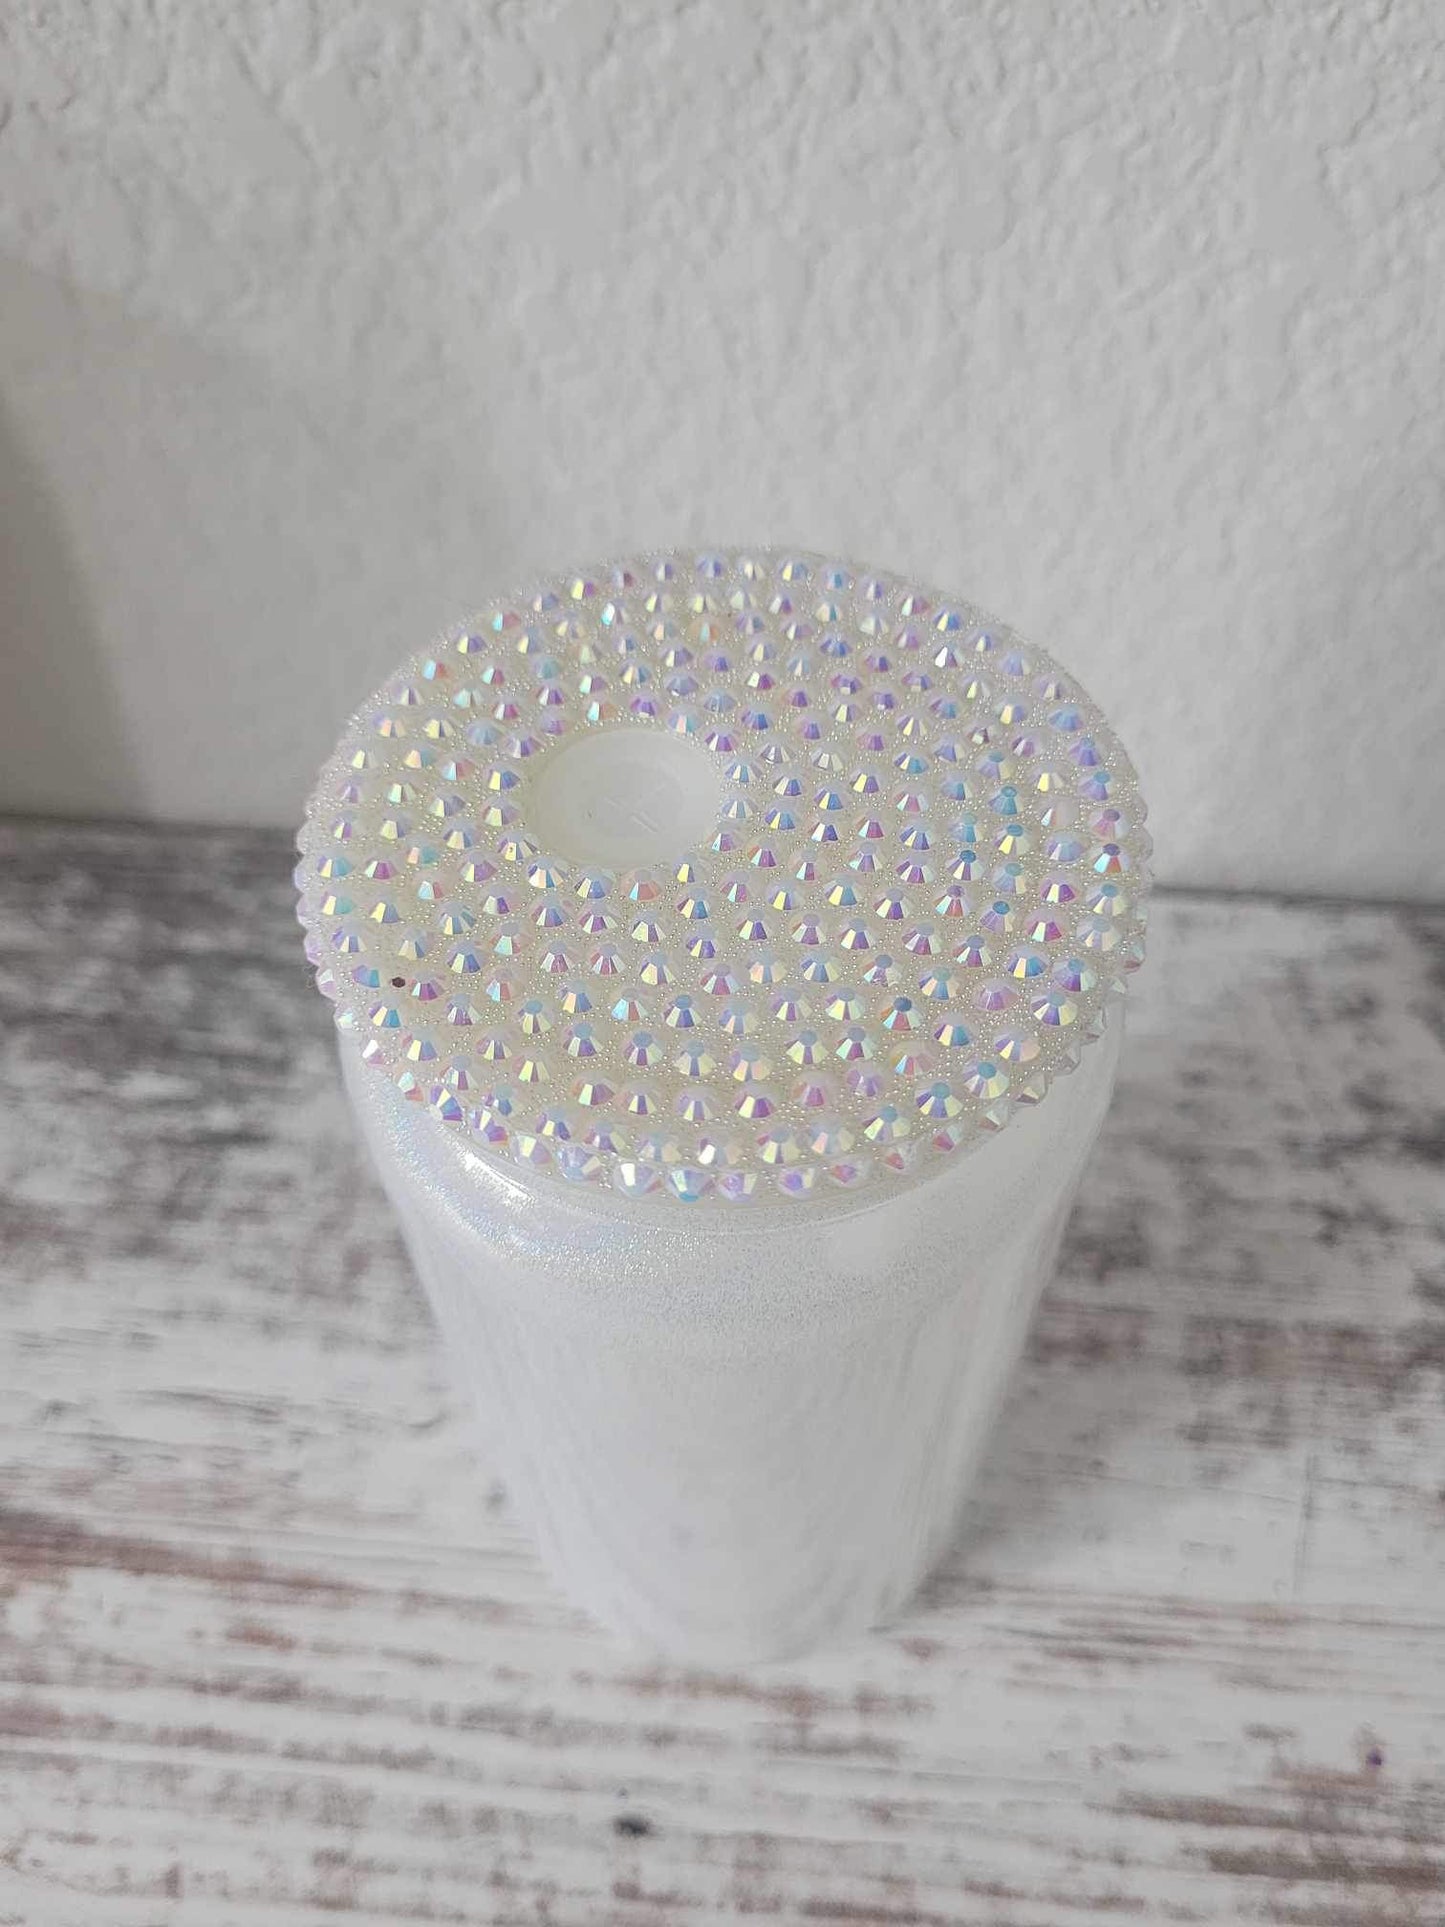 16oz Shimmer Holographic Can style, Comes with Iridescent Rhinestone Lid!Ships from the USA